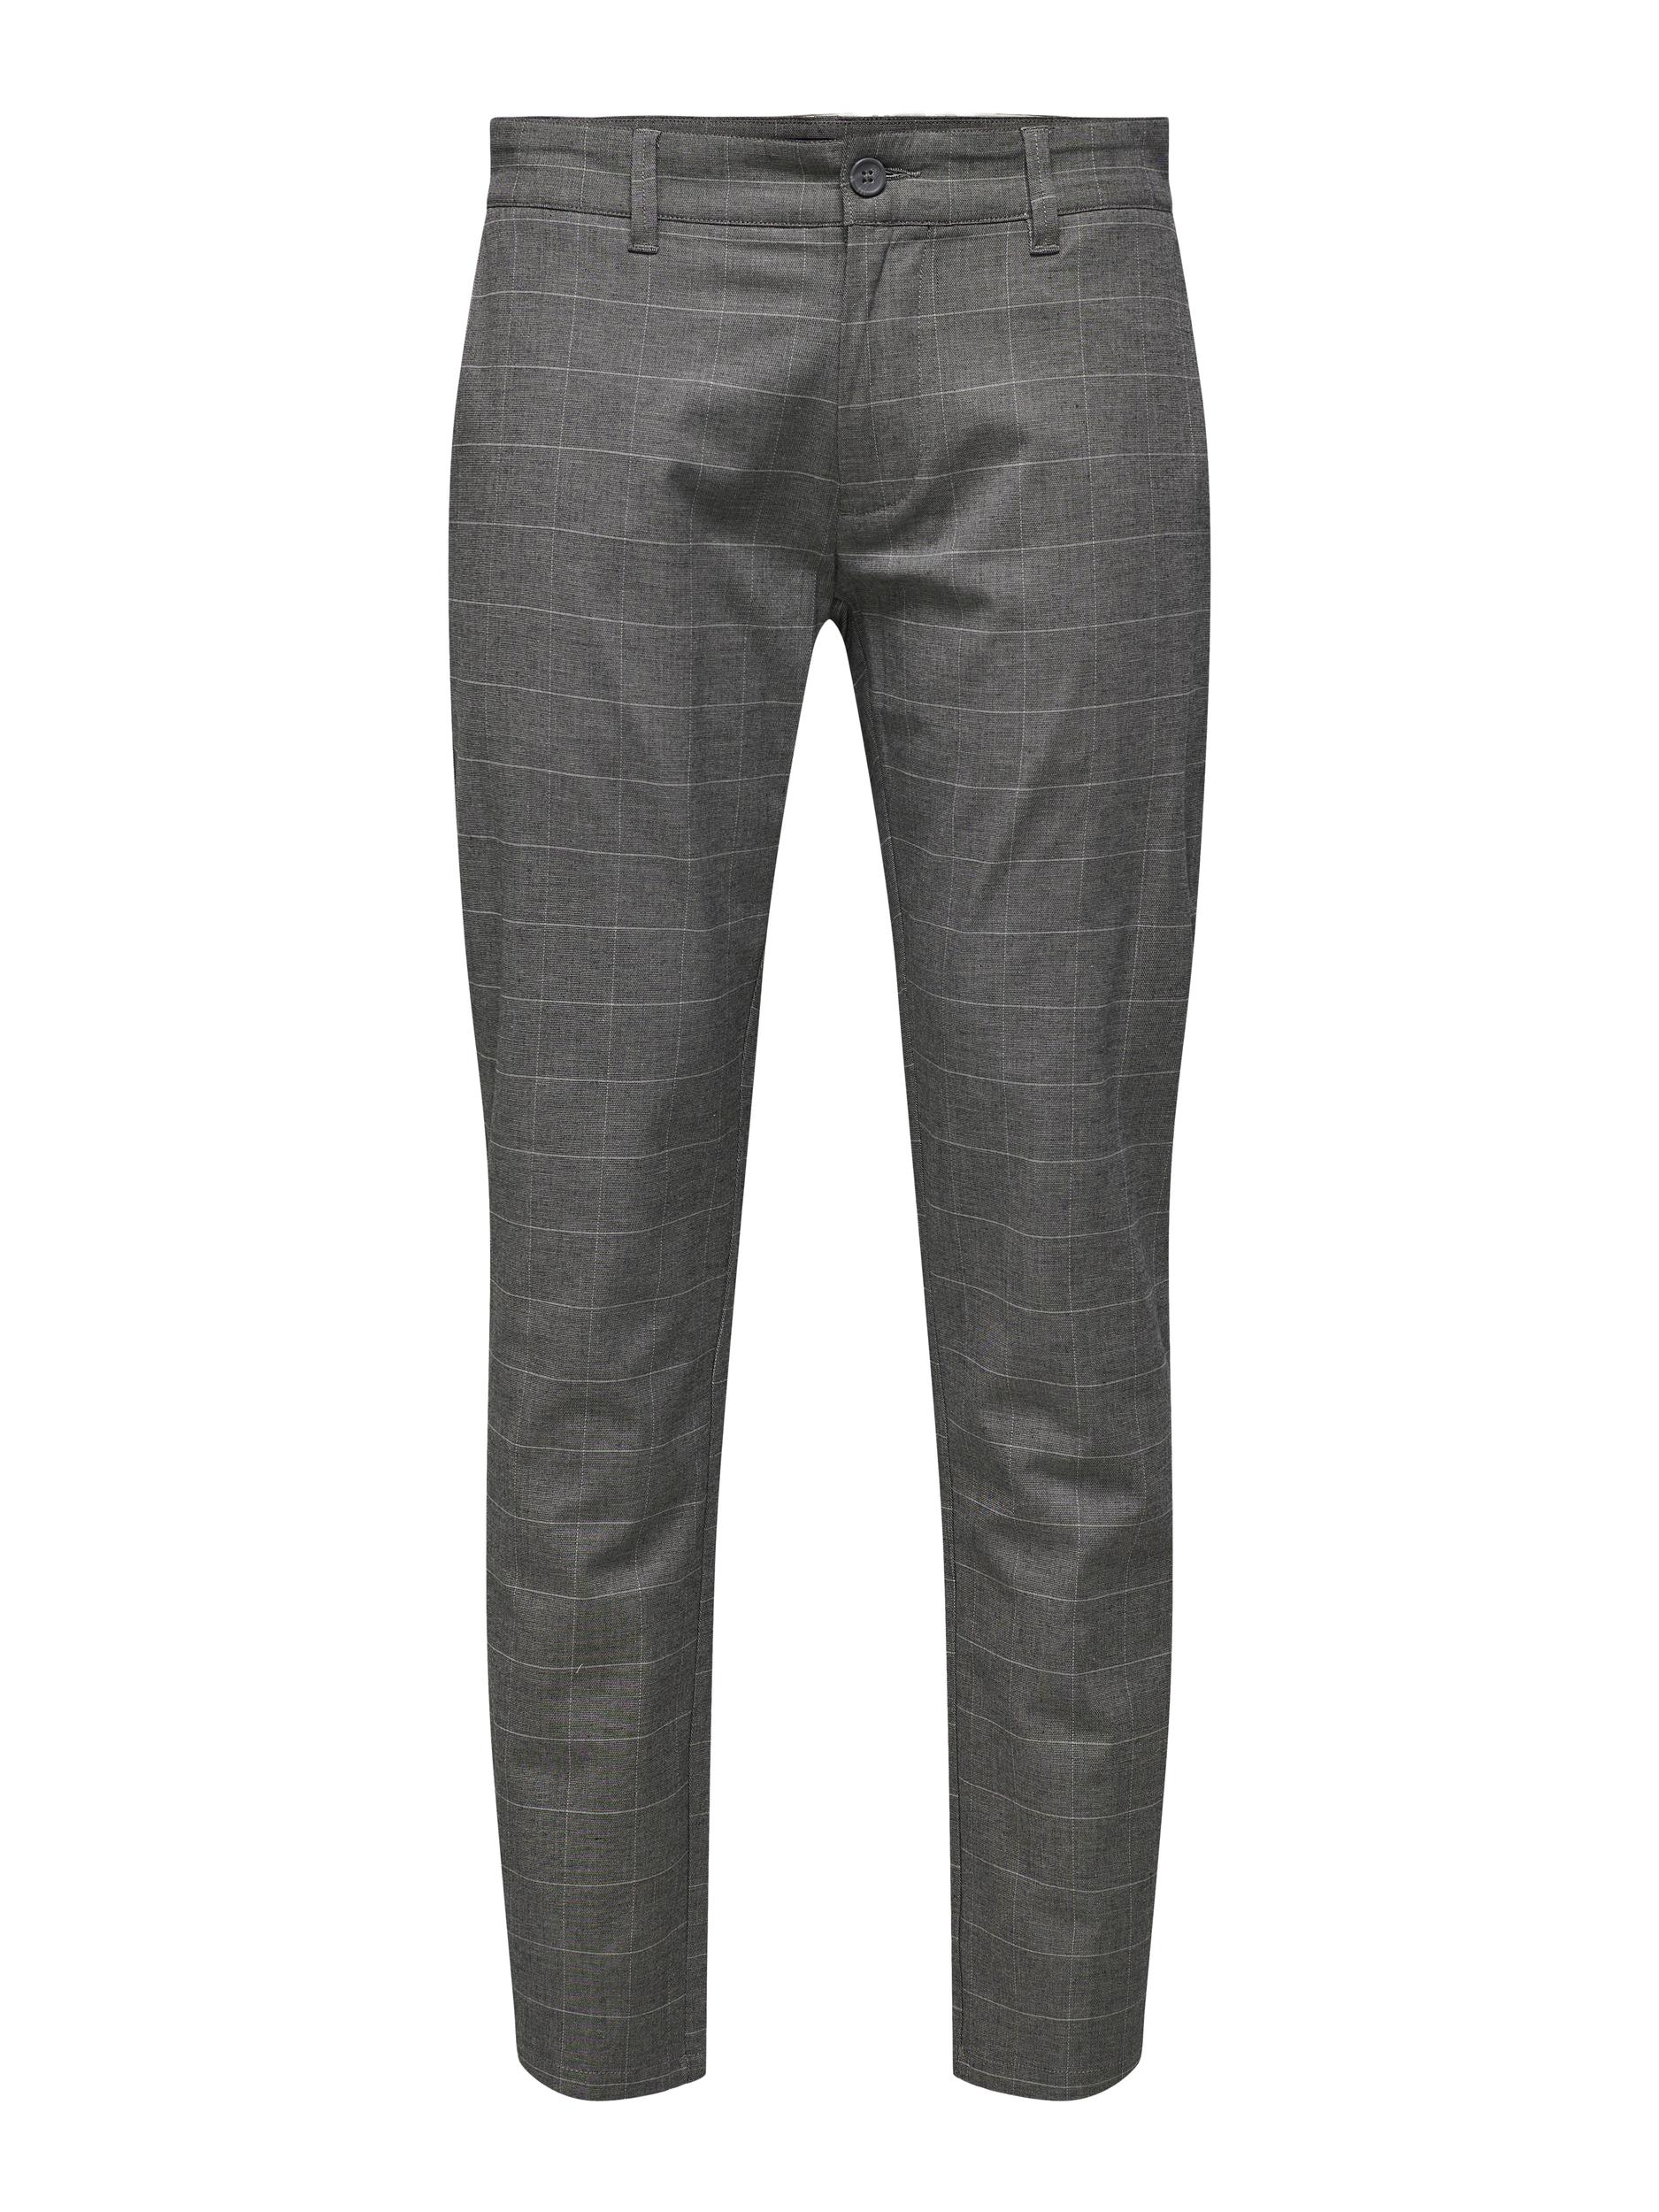 ONLY Mark Check Chinos, Grey Pinstripe, W34/L34